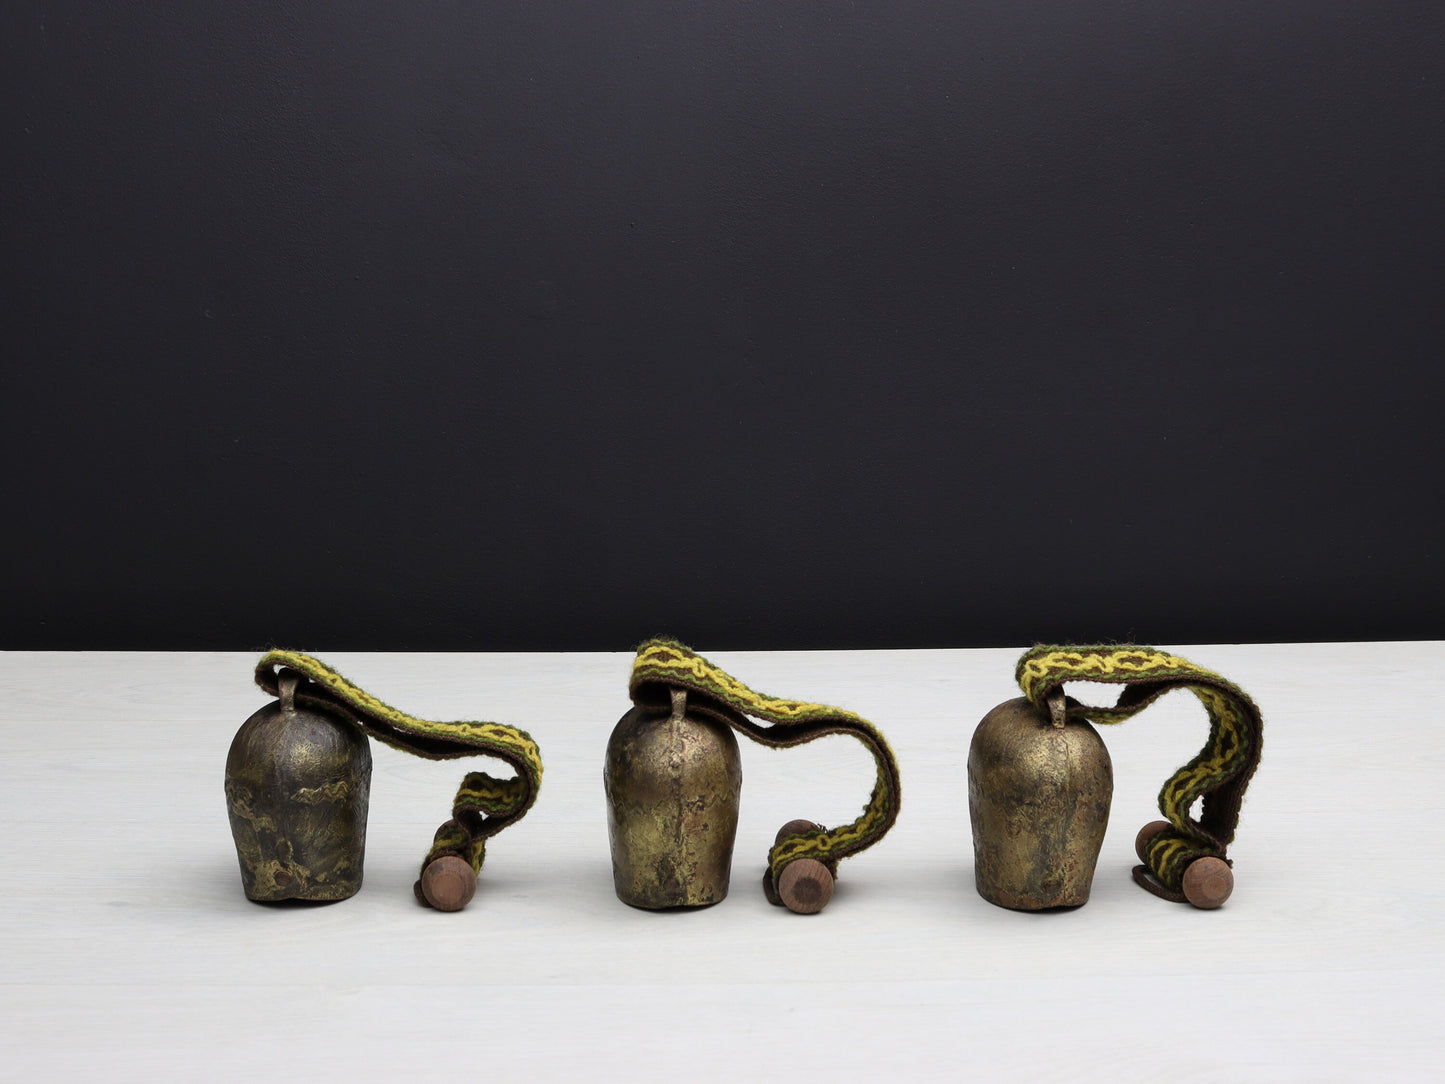 Charming Vintage bells from Europe